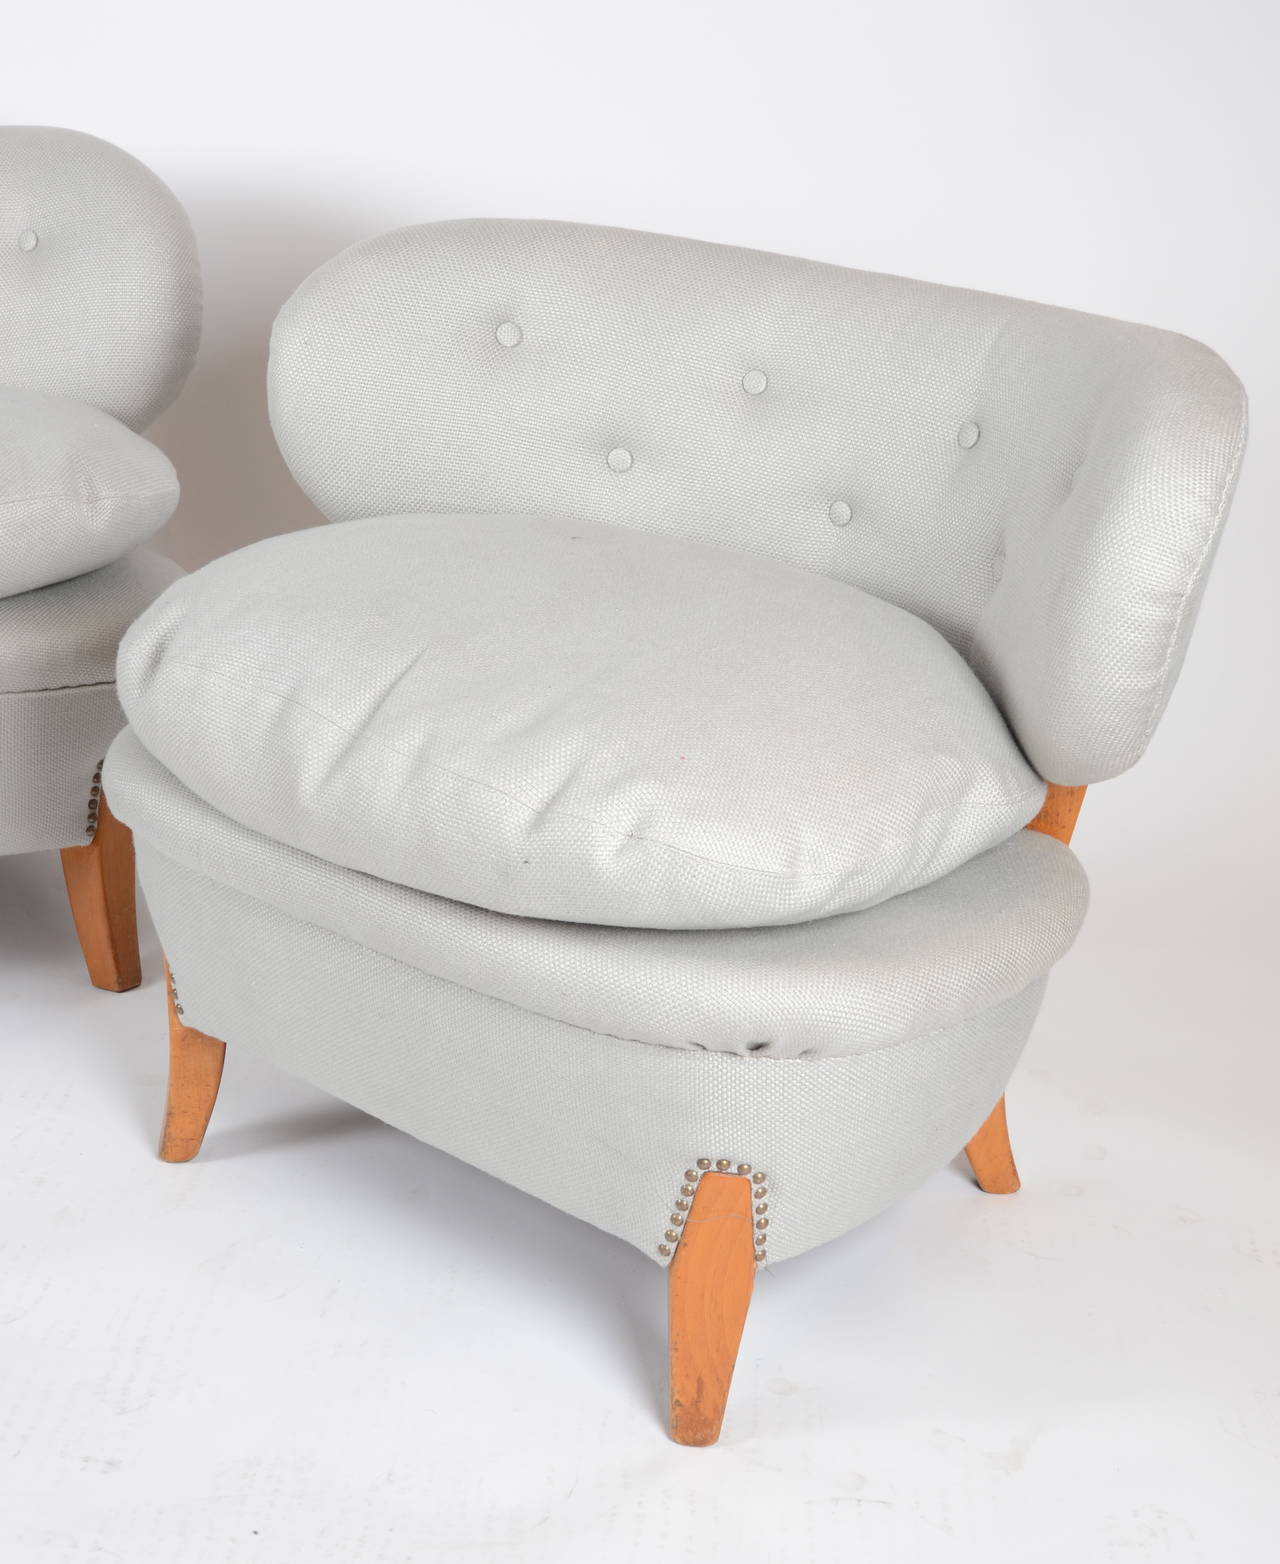 Two easy chairs, model Schulz, designed by Otto Schulz for Boet, 1936. Manufactured by Jio Möbler, Sweden.